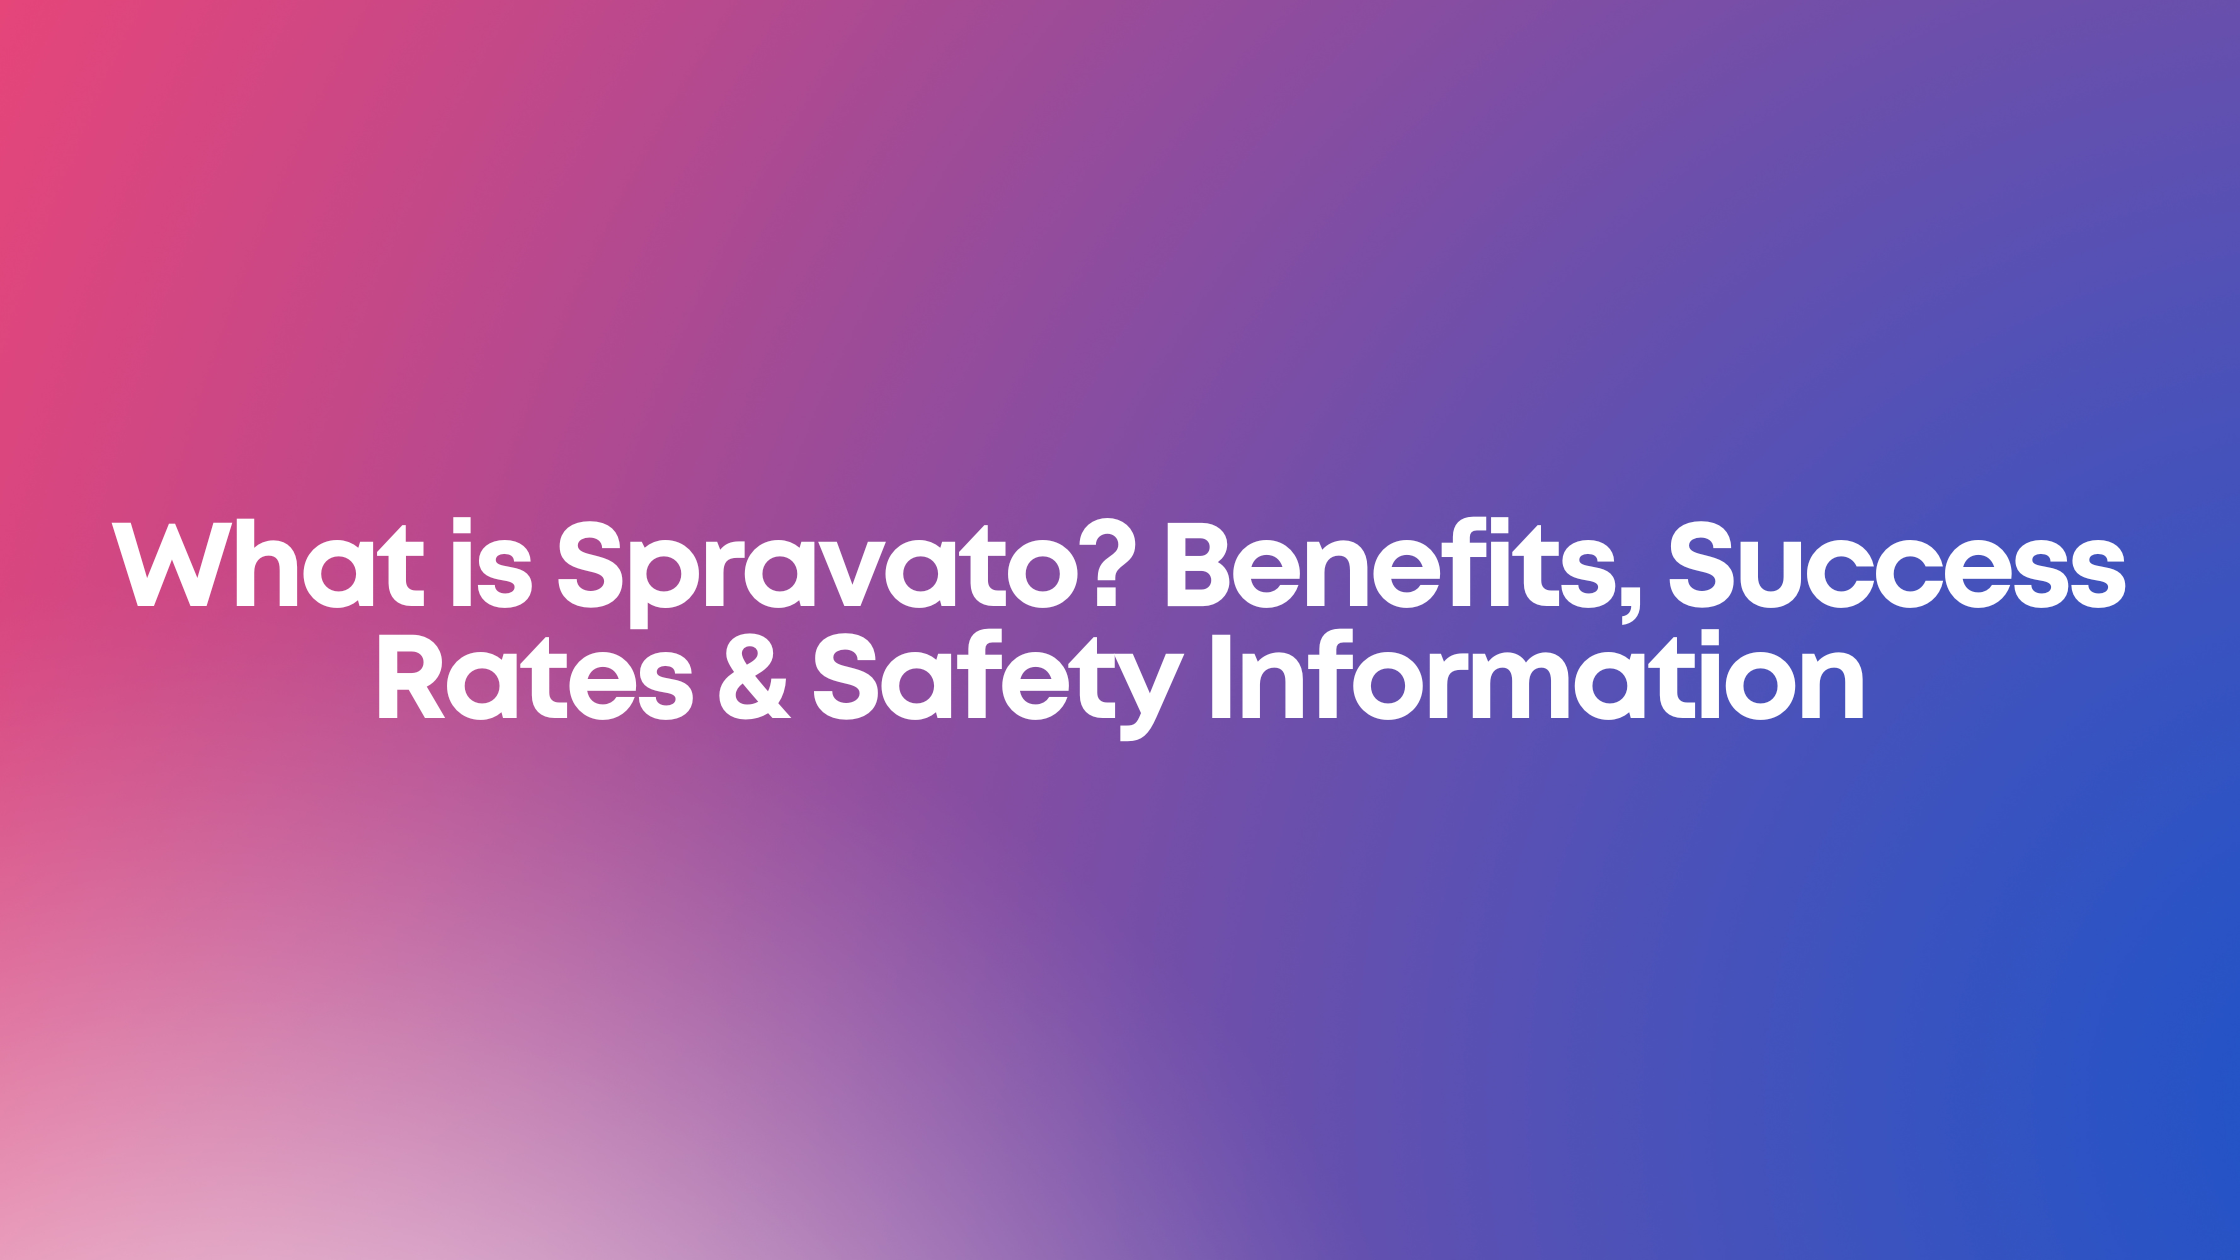 You are currently viewing What is Spravato? Benefits, Success Rates & Safety Information